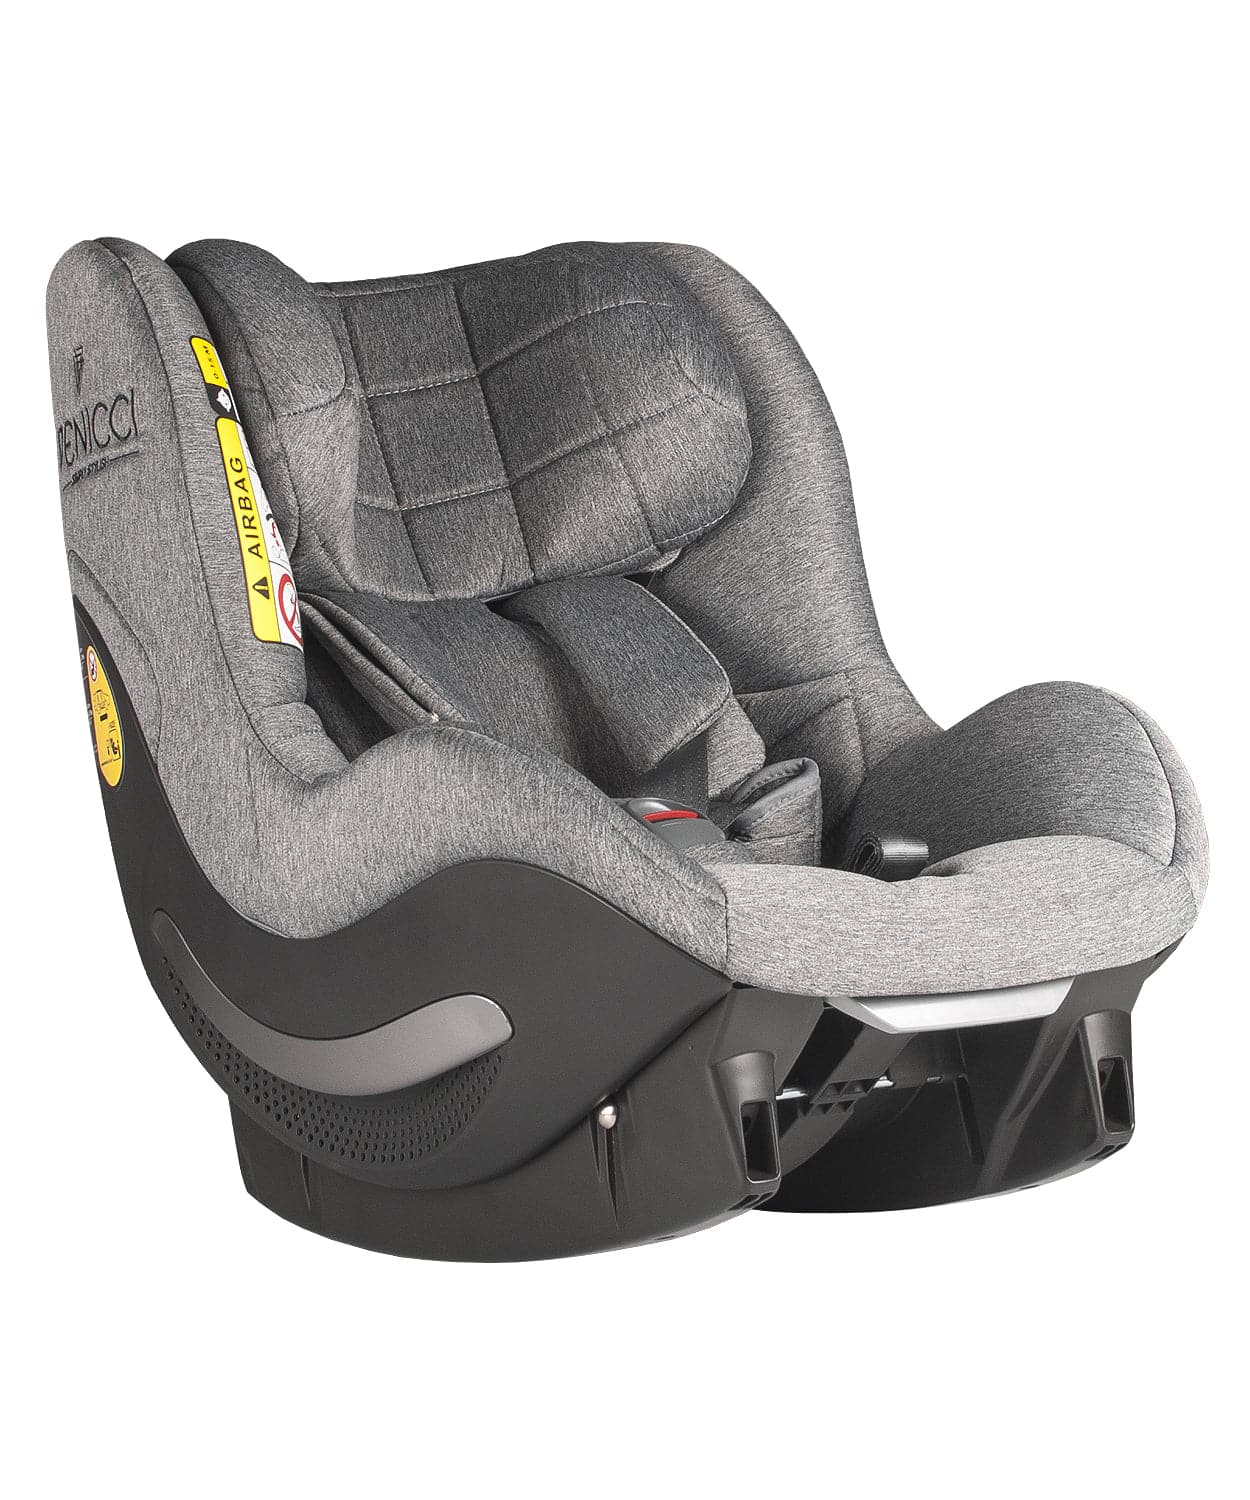 Venicci iSize Aerofix Car Seat - Grey - For Your Little One